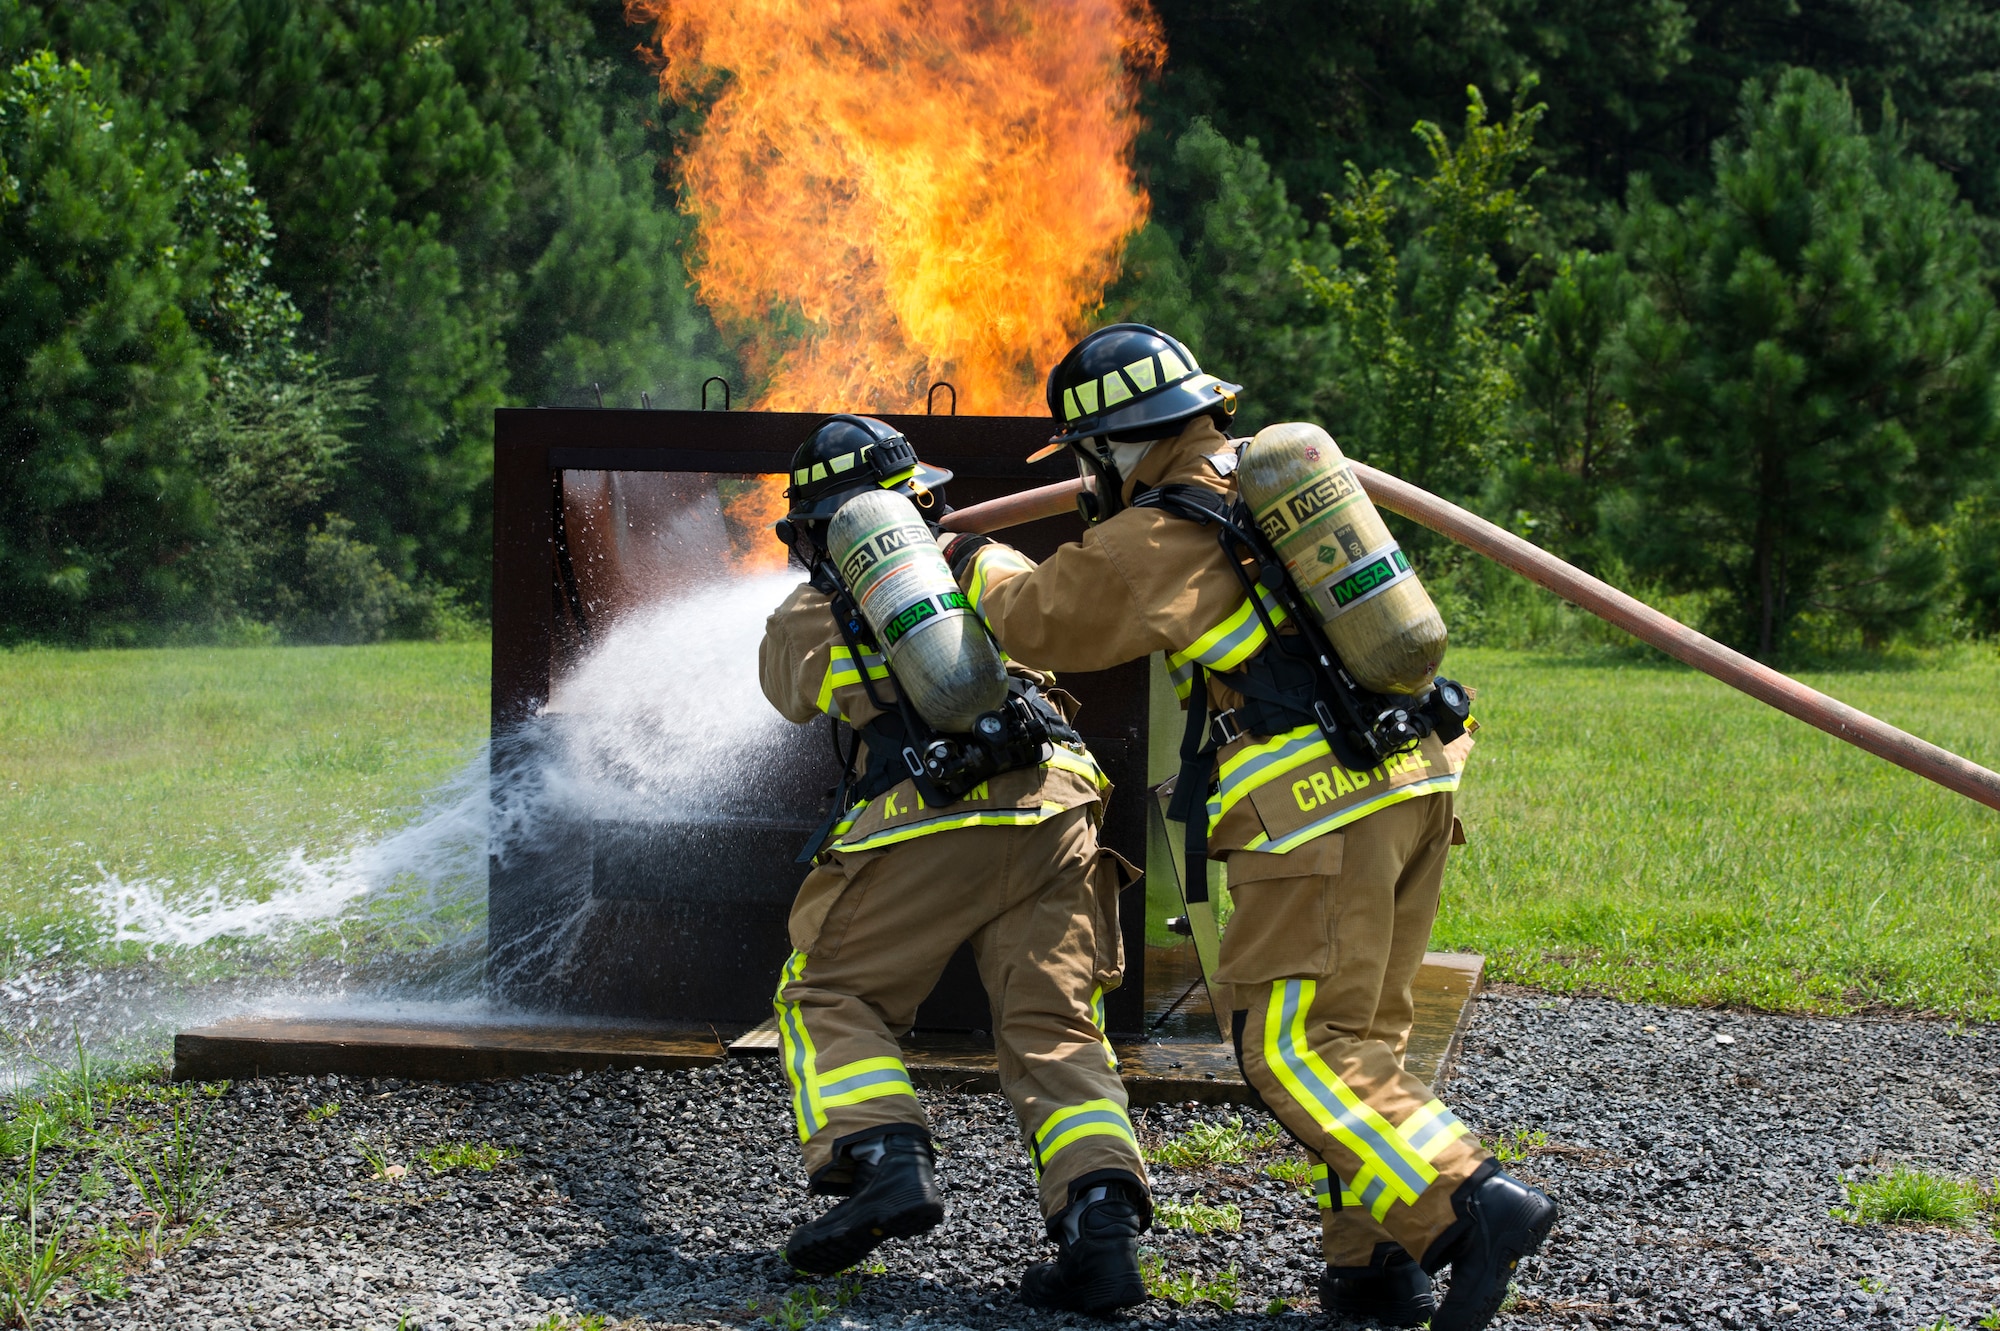 U.S. Air Force Senior Airman Kula Funn with the 624th Civil Engineer Squadron from Joint Base Pearl Harbor-Hickam, Hawaii and Staff Sgt. Andrew Crabtree with the 514th CES from Joint Base McGuire-Dix-Lakehurst, New Jersey, respond to a simulated dumpster fire as a part of Patriot Warrior 2018 at Dobbins Air Reserve Base, Georgia, Aug. 13, 2018. Patriot Warrior is an Air Force Reserve exercise designed to prepare Reserve Citizen Airmen for world-wide deployments and provides knowledge and experience to strengthen home station training programs. (Air Force photo by Master Sgt. Theanne Herrmann)